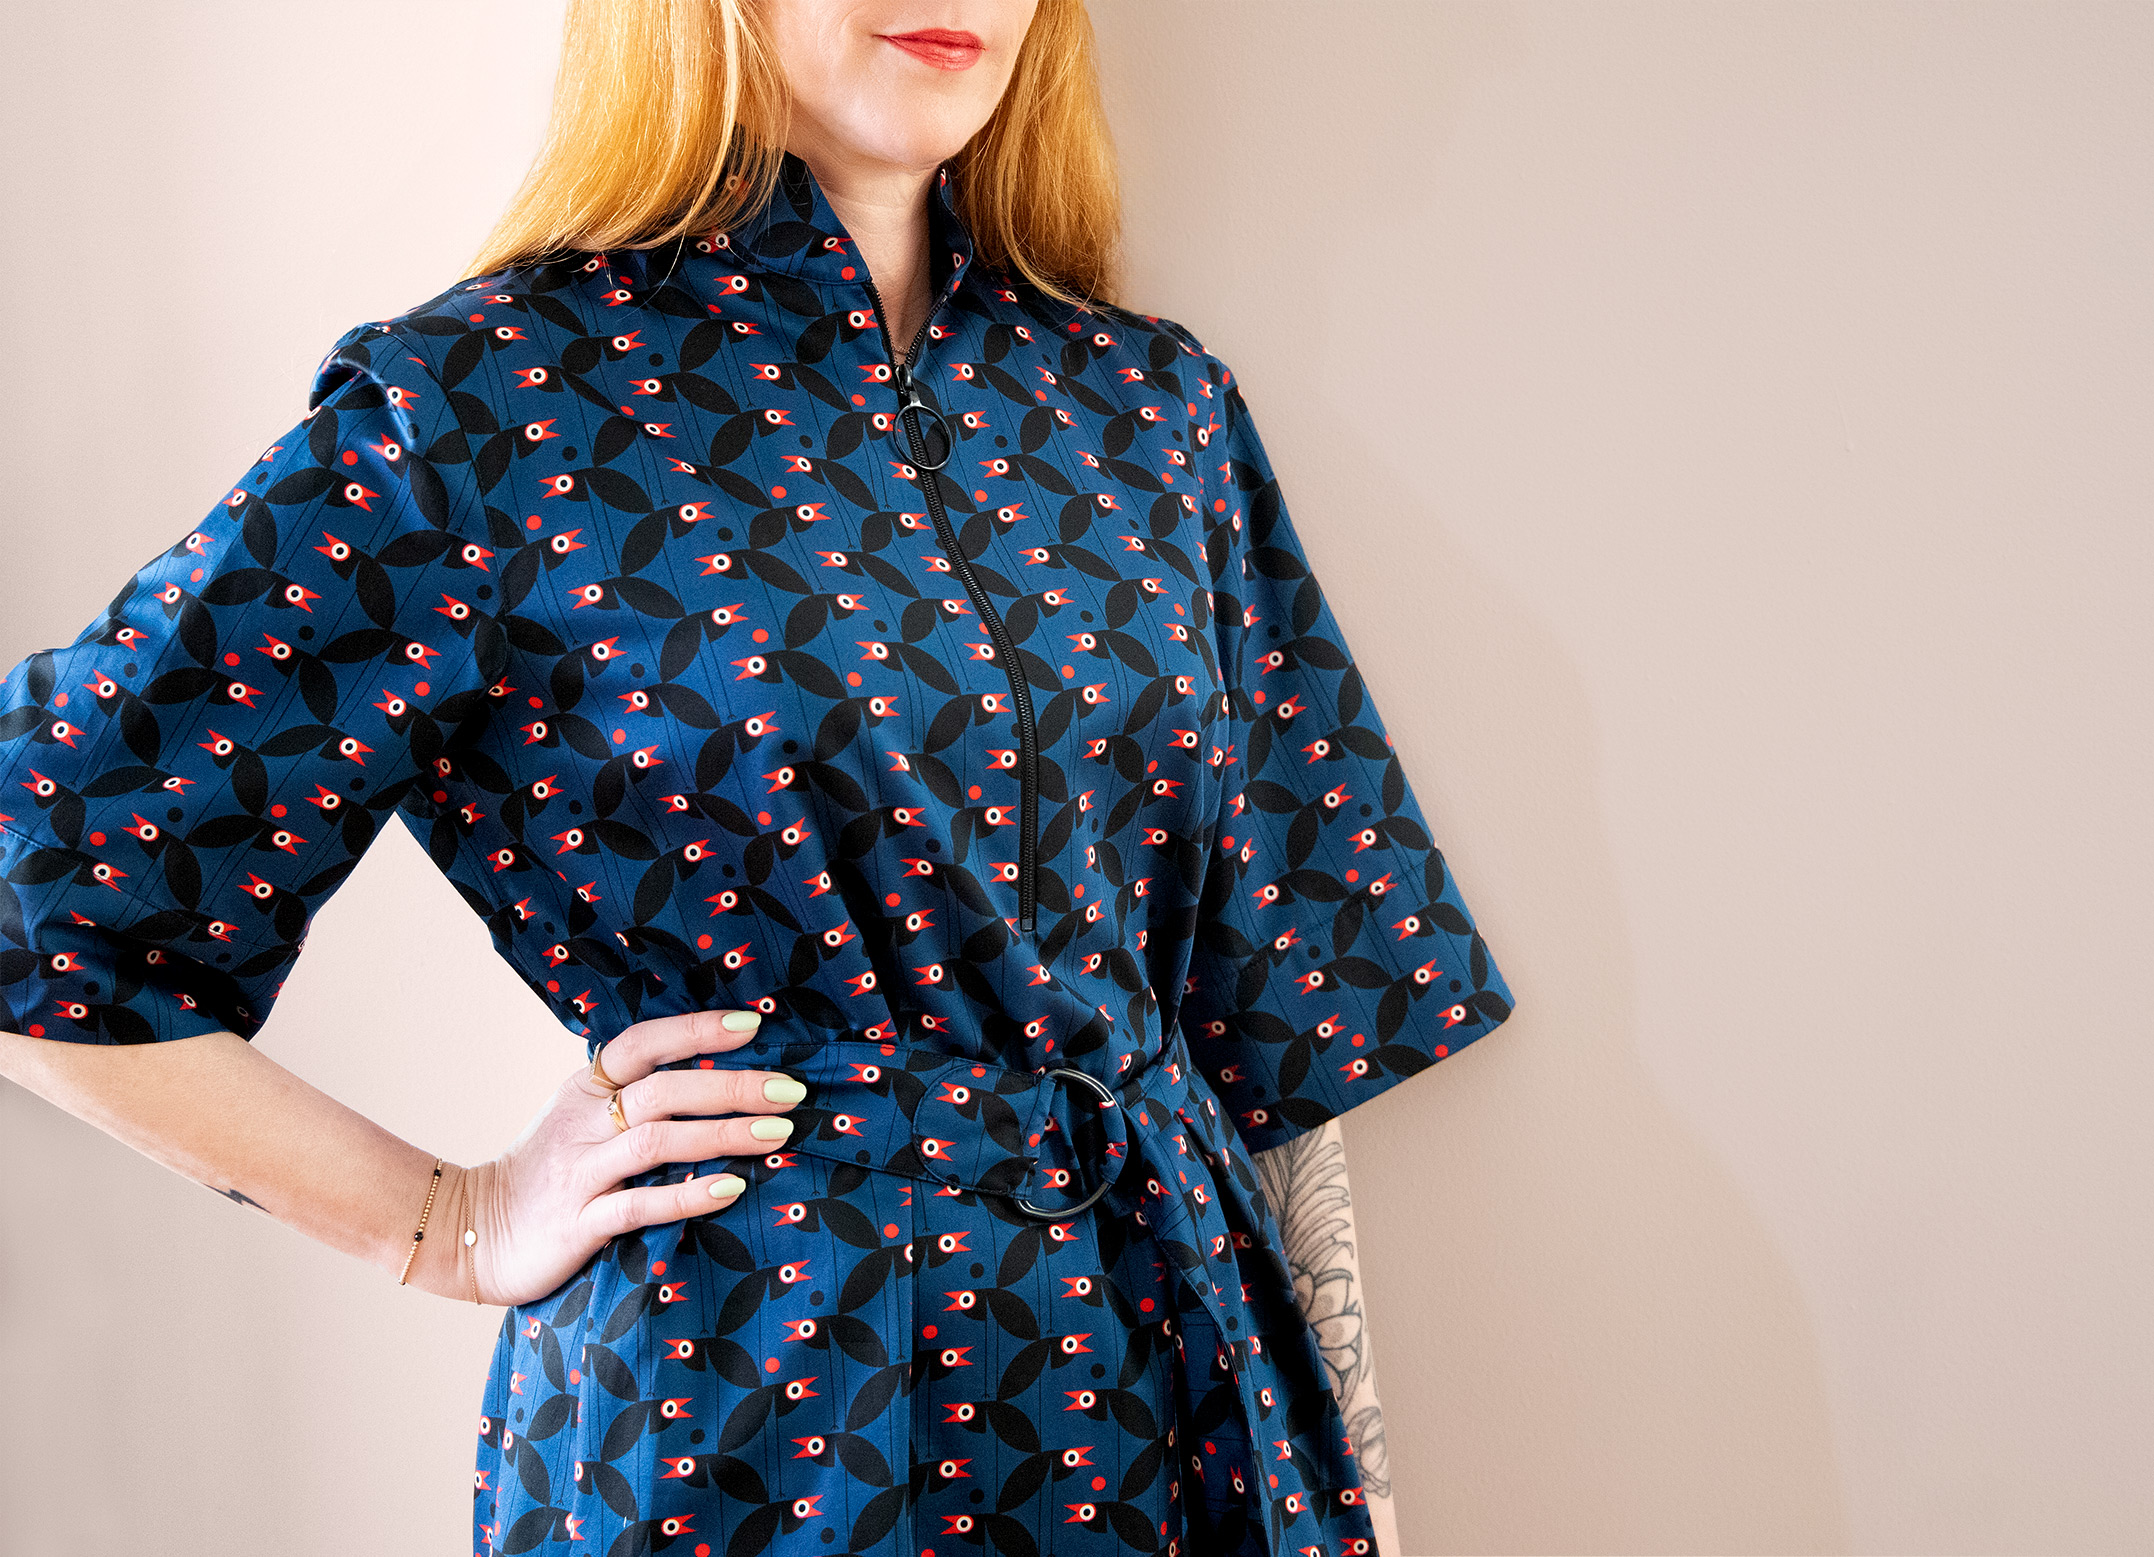 red haired woman with red lipstick and hand on hip wearing a cobalt blue shirt dress with crows pattern in black, white